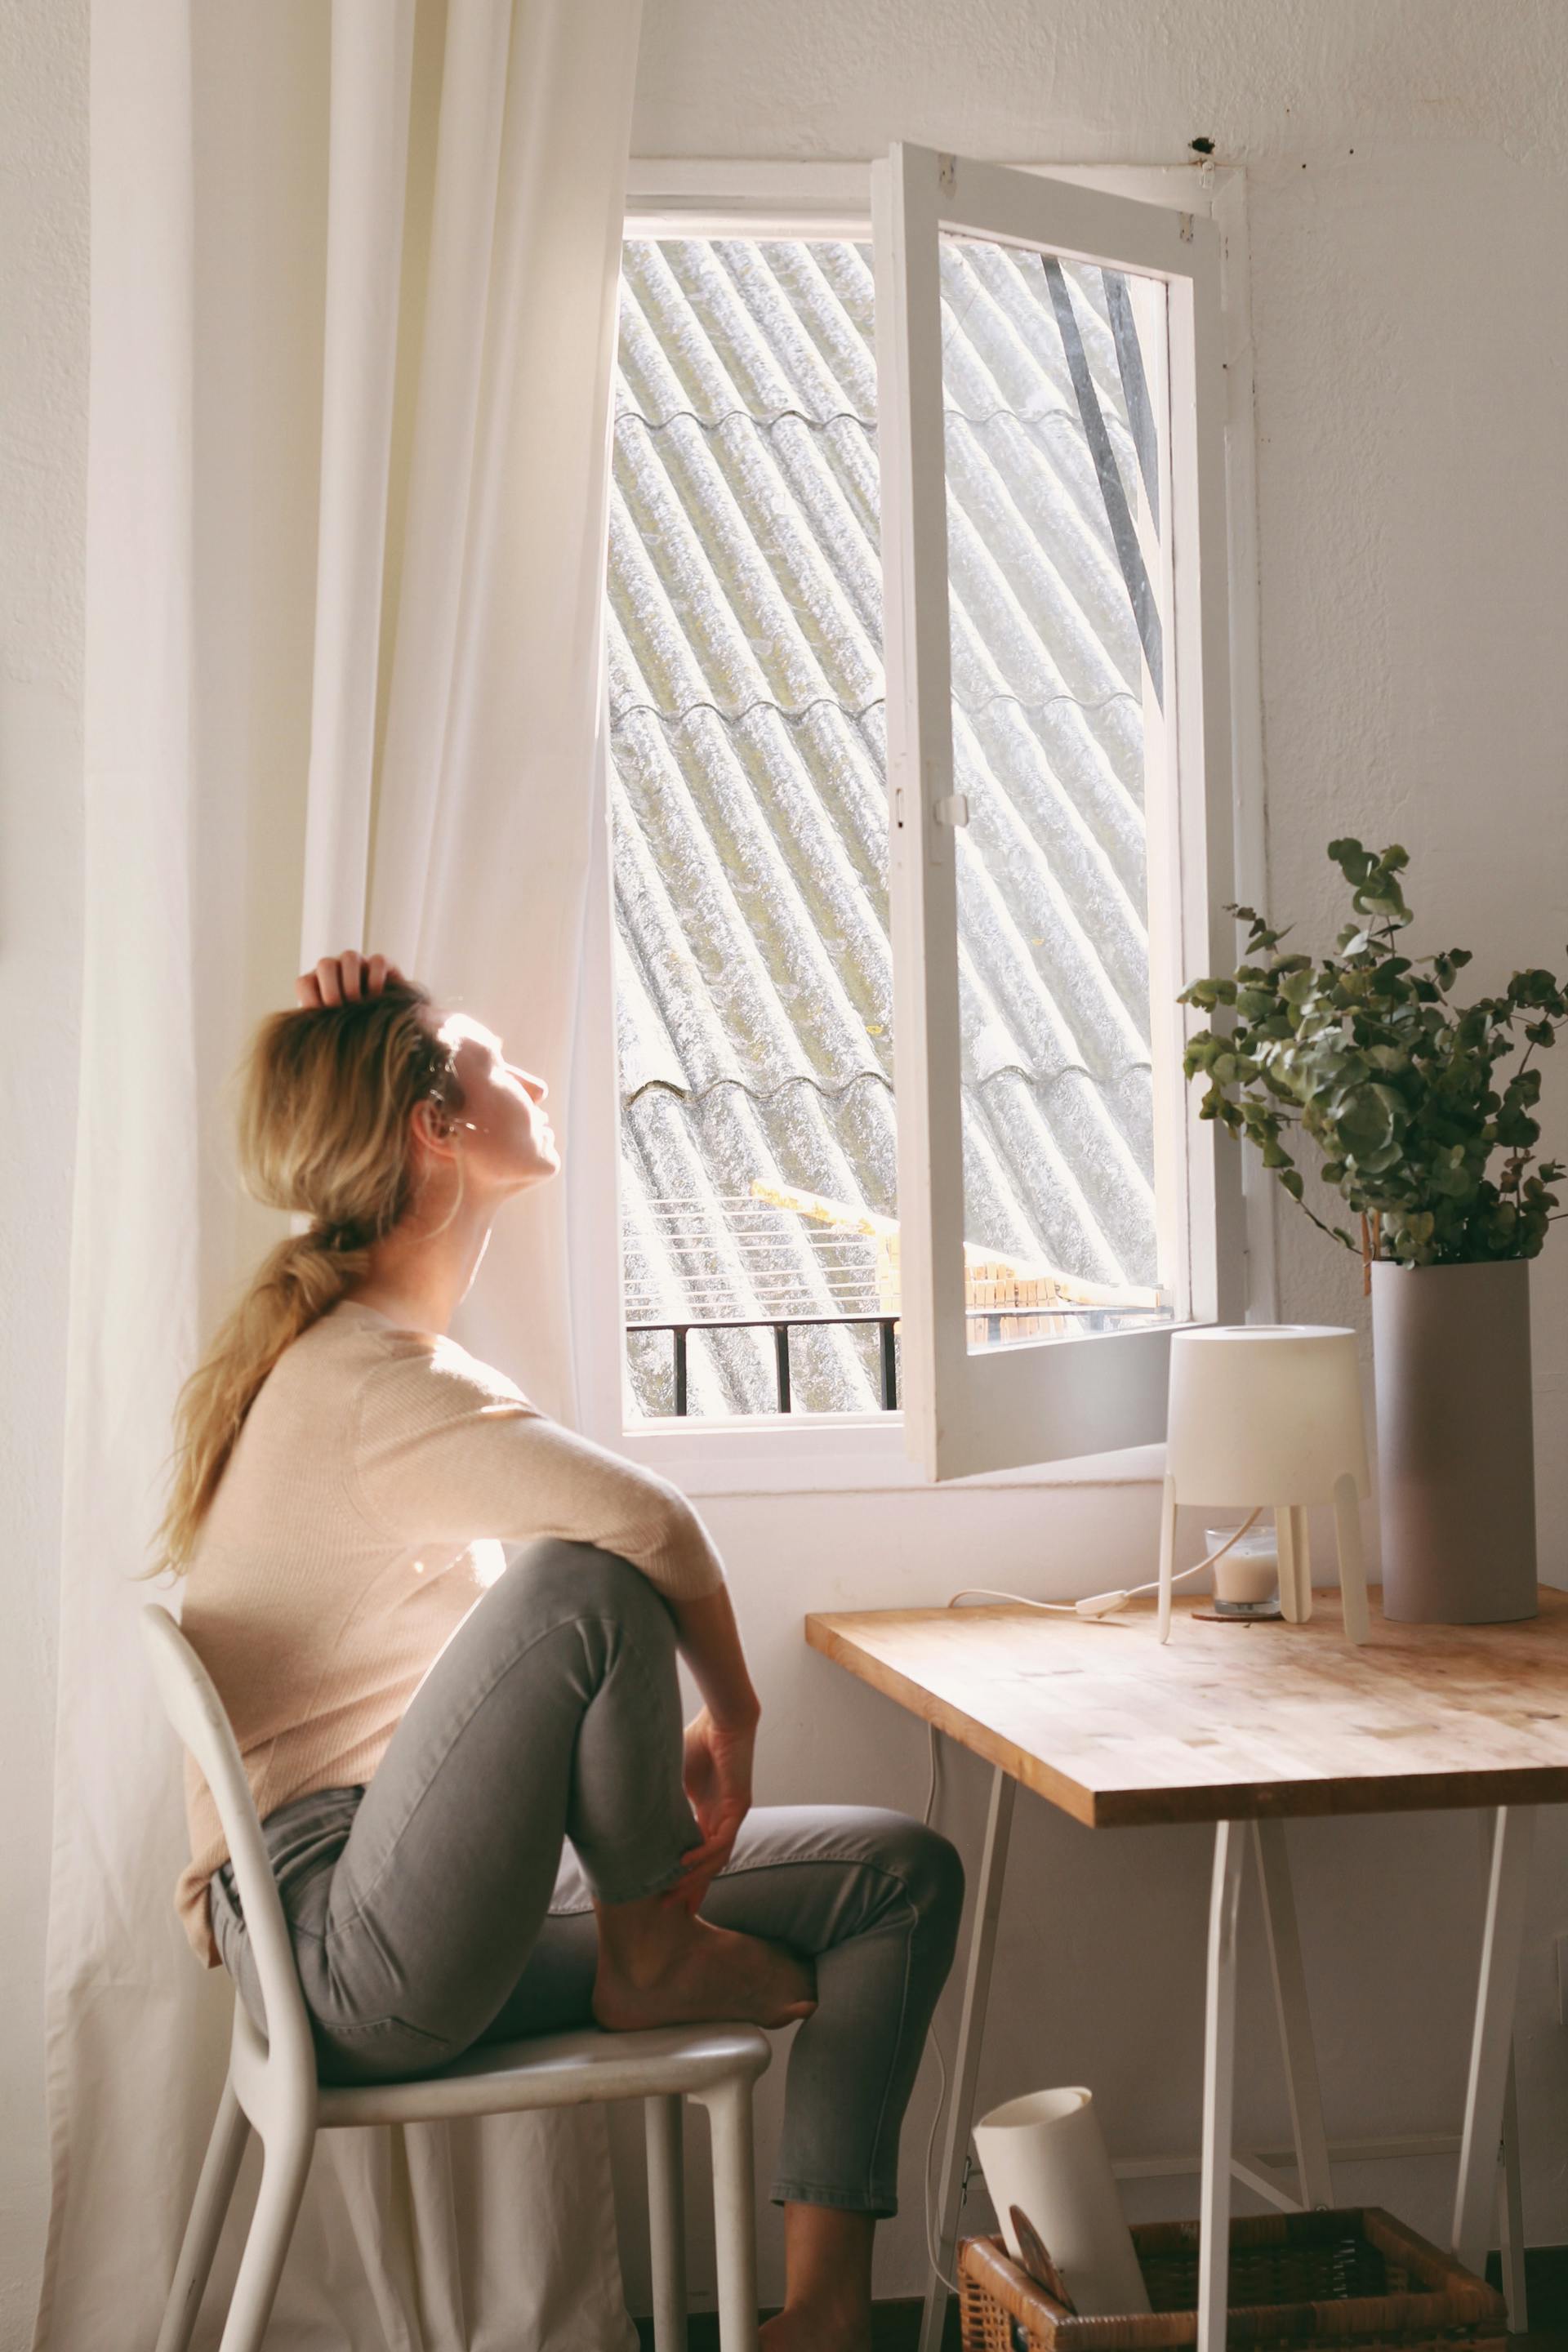 A woman looking out the window | Source: Pexels